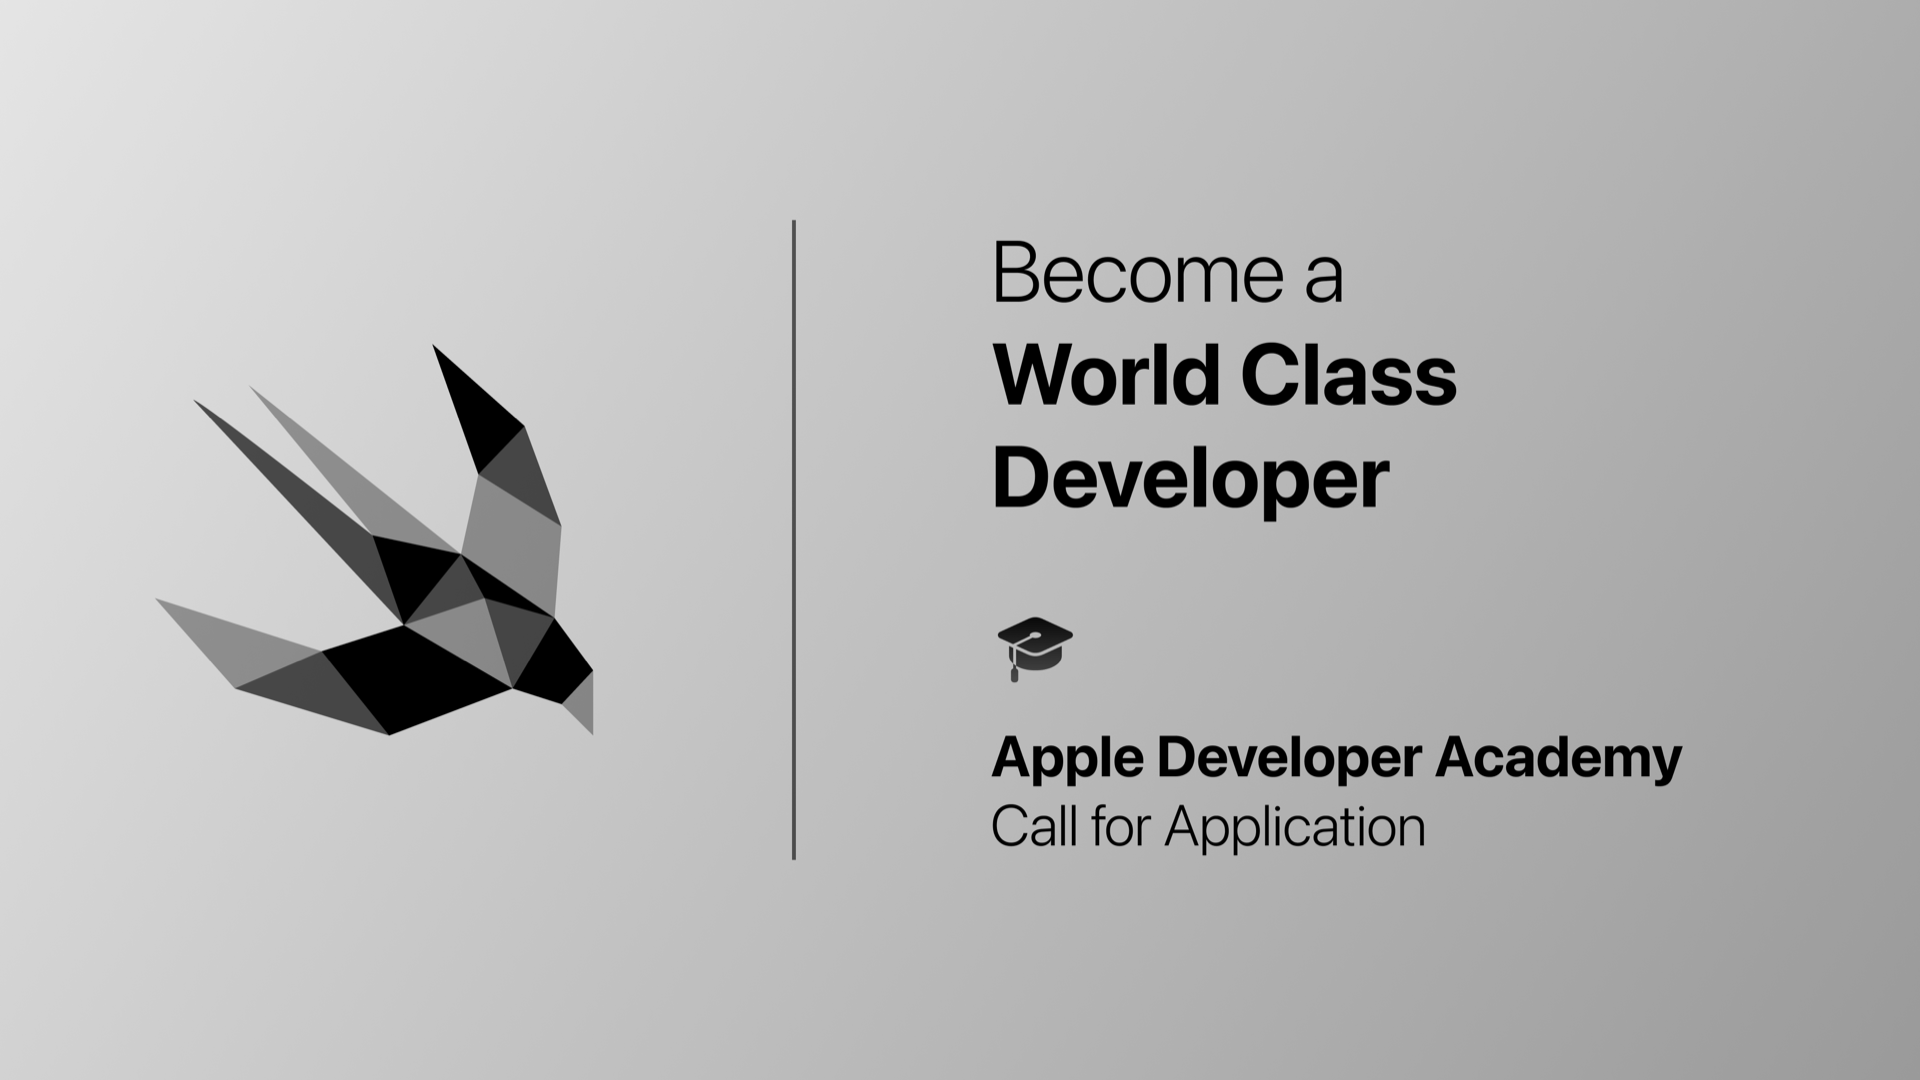 Call for Application at the Apple Developer Academy